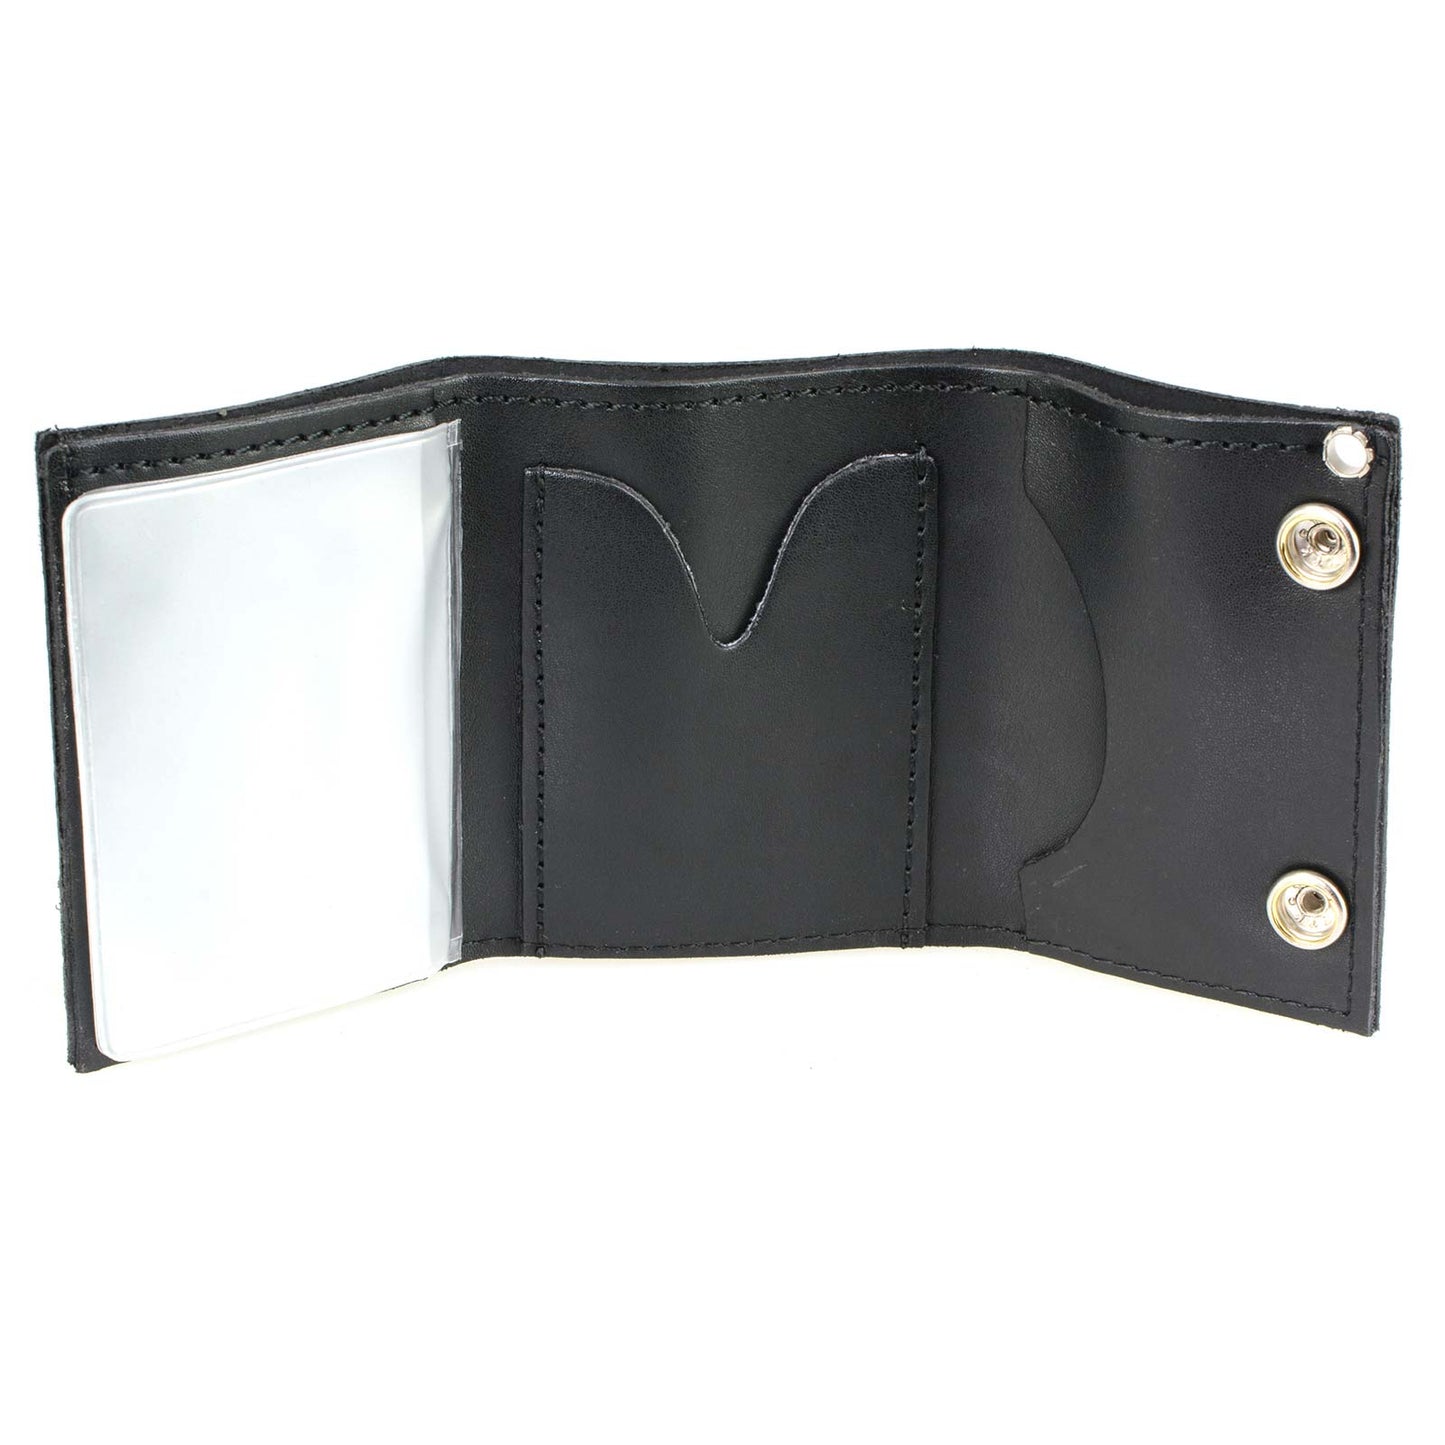 Milwaukee Leather MLW7838 Men's 4” Leather “Flaming Eagle” Tri-Fold Wallet w/ Anti-Theft Stainless Steel Chain